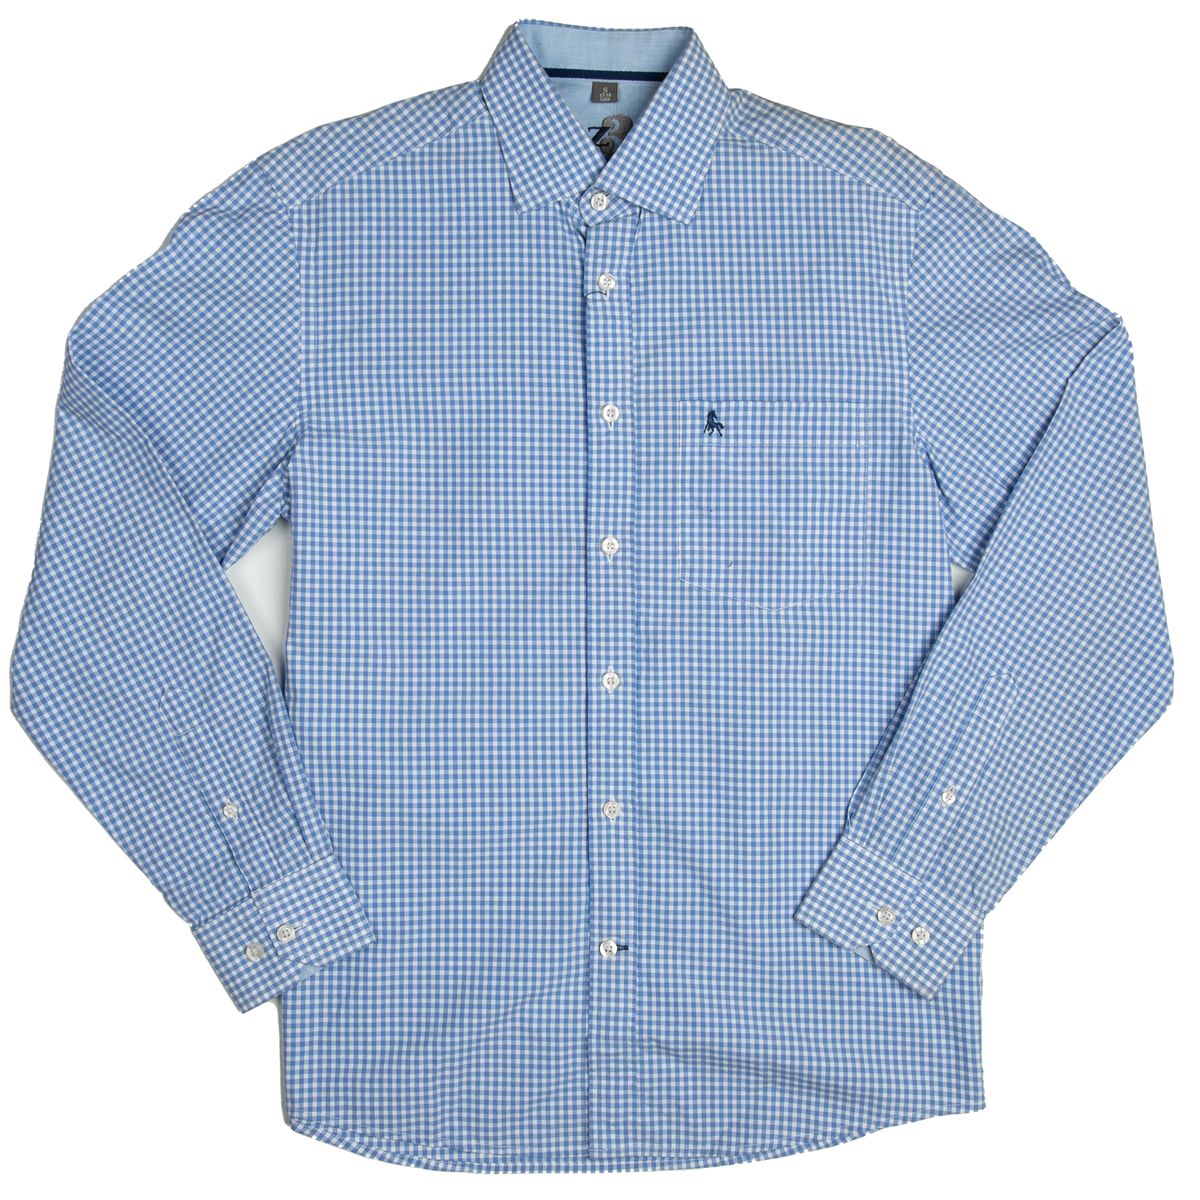 Z3 - Men's Harbour Cheacked Long Sleeve Cotton Shirt | Shop Today. Get ...